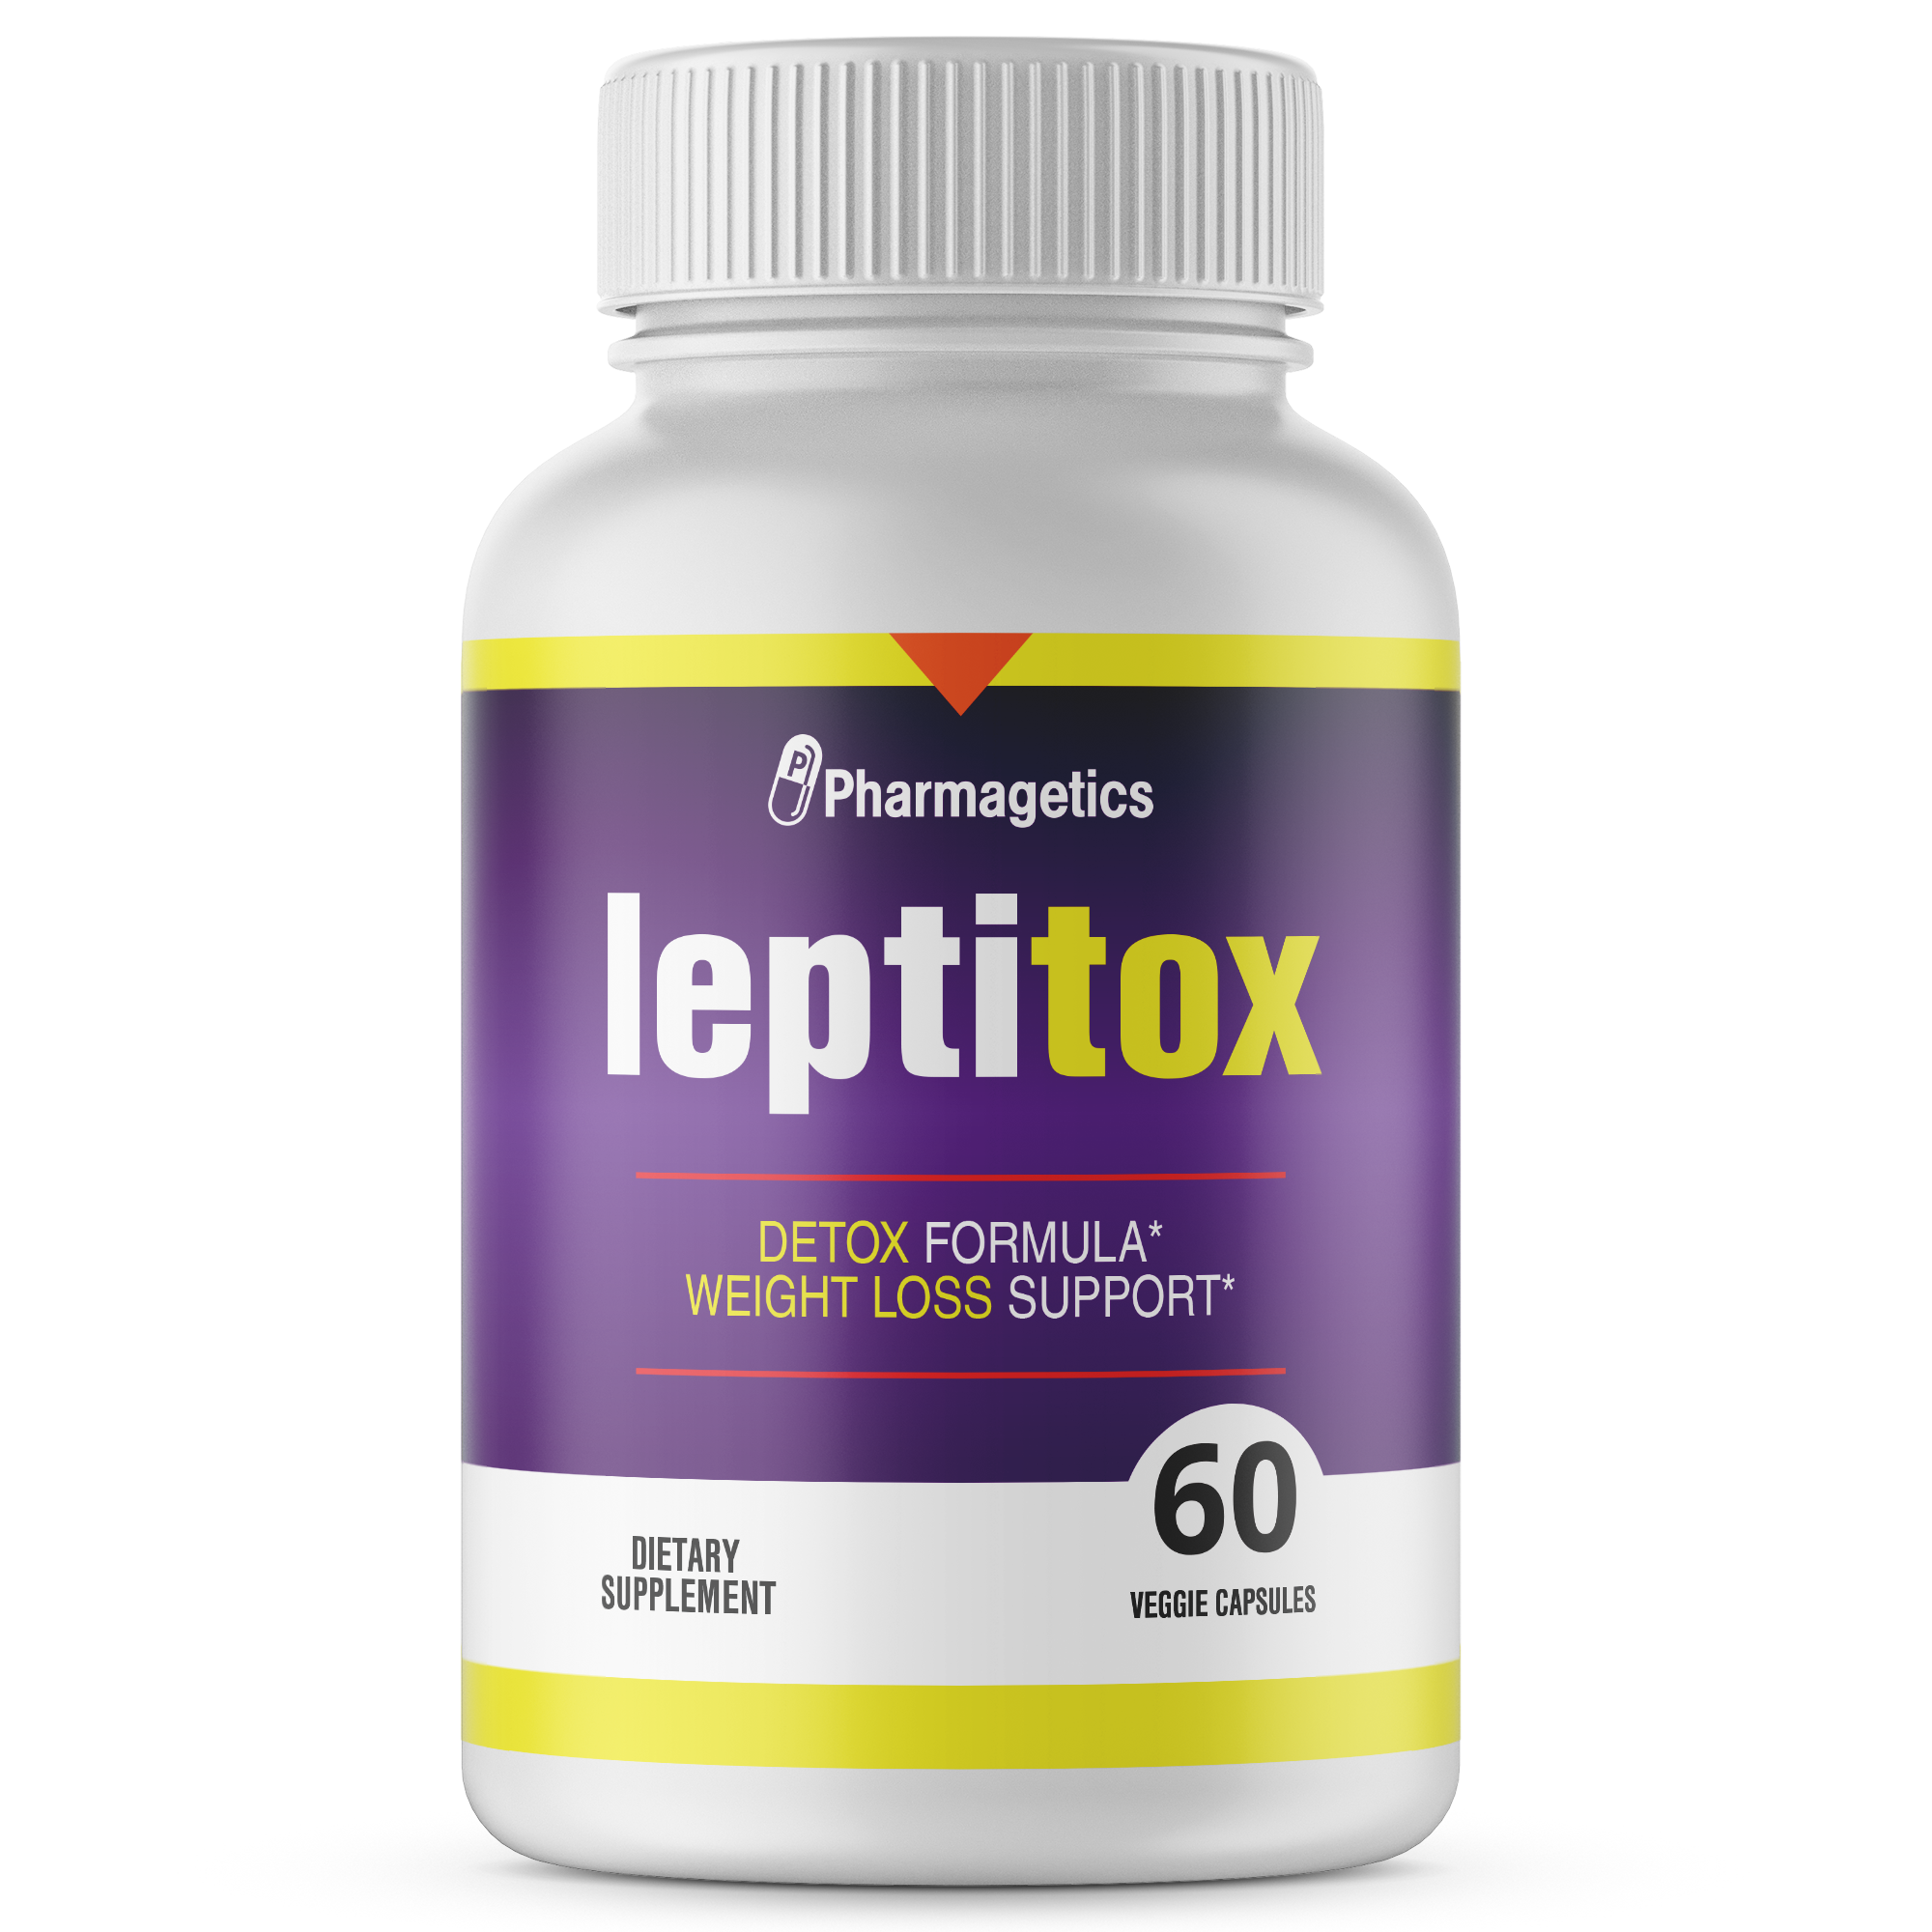 Leptitox Detox Formula Appetite Control Weight Loss Support 60 Capsules